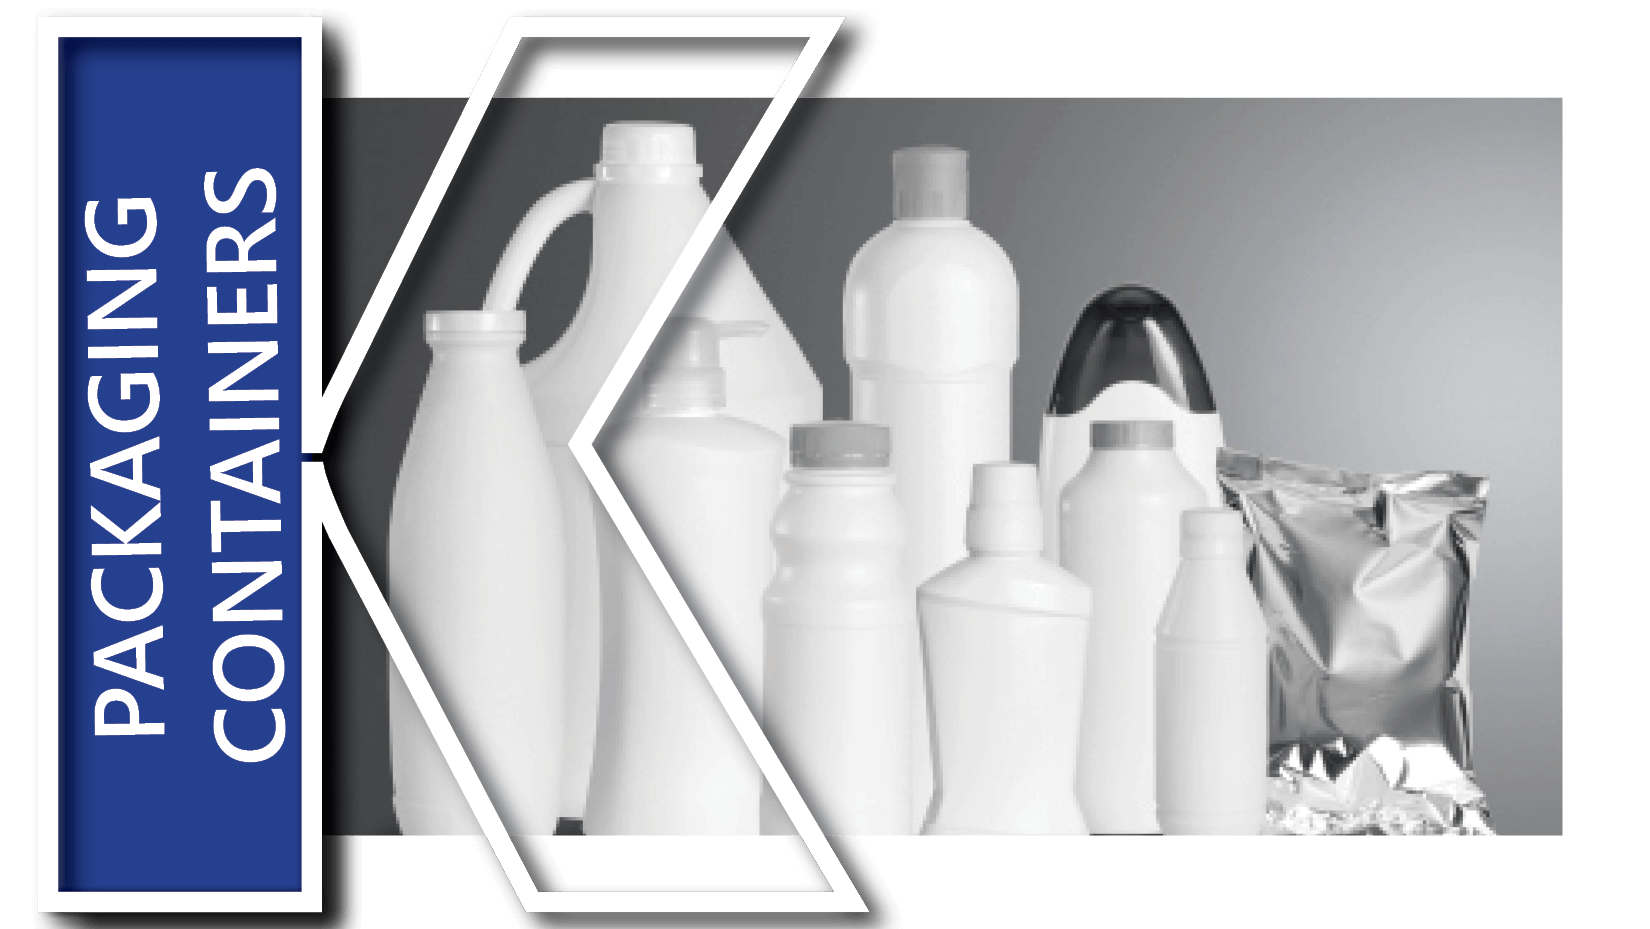 Assortment of plastic bottles and containers with large K graphic to the left and Packaging & Containers in text 